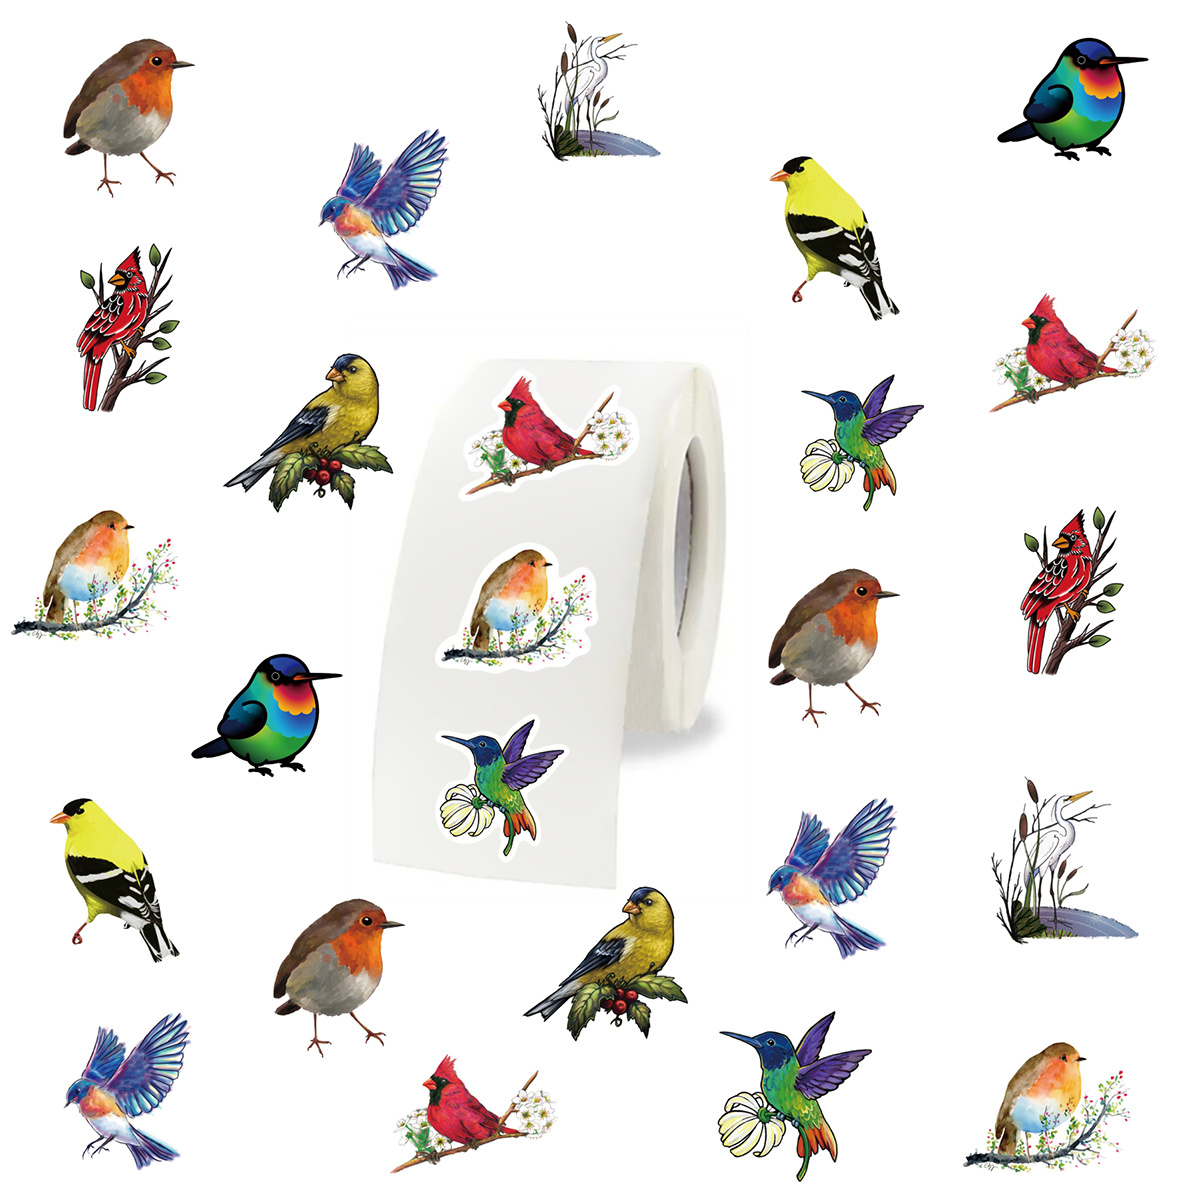 

500pcs Cute Cartoon Bird Animal Series Stickers For Christmas Halloween Party Decorations For Teens Girls Boys For Scrapbooking Envelopes Water Bottles (1inch Labels/ 10 Patterns)